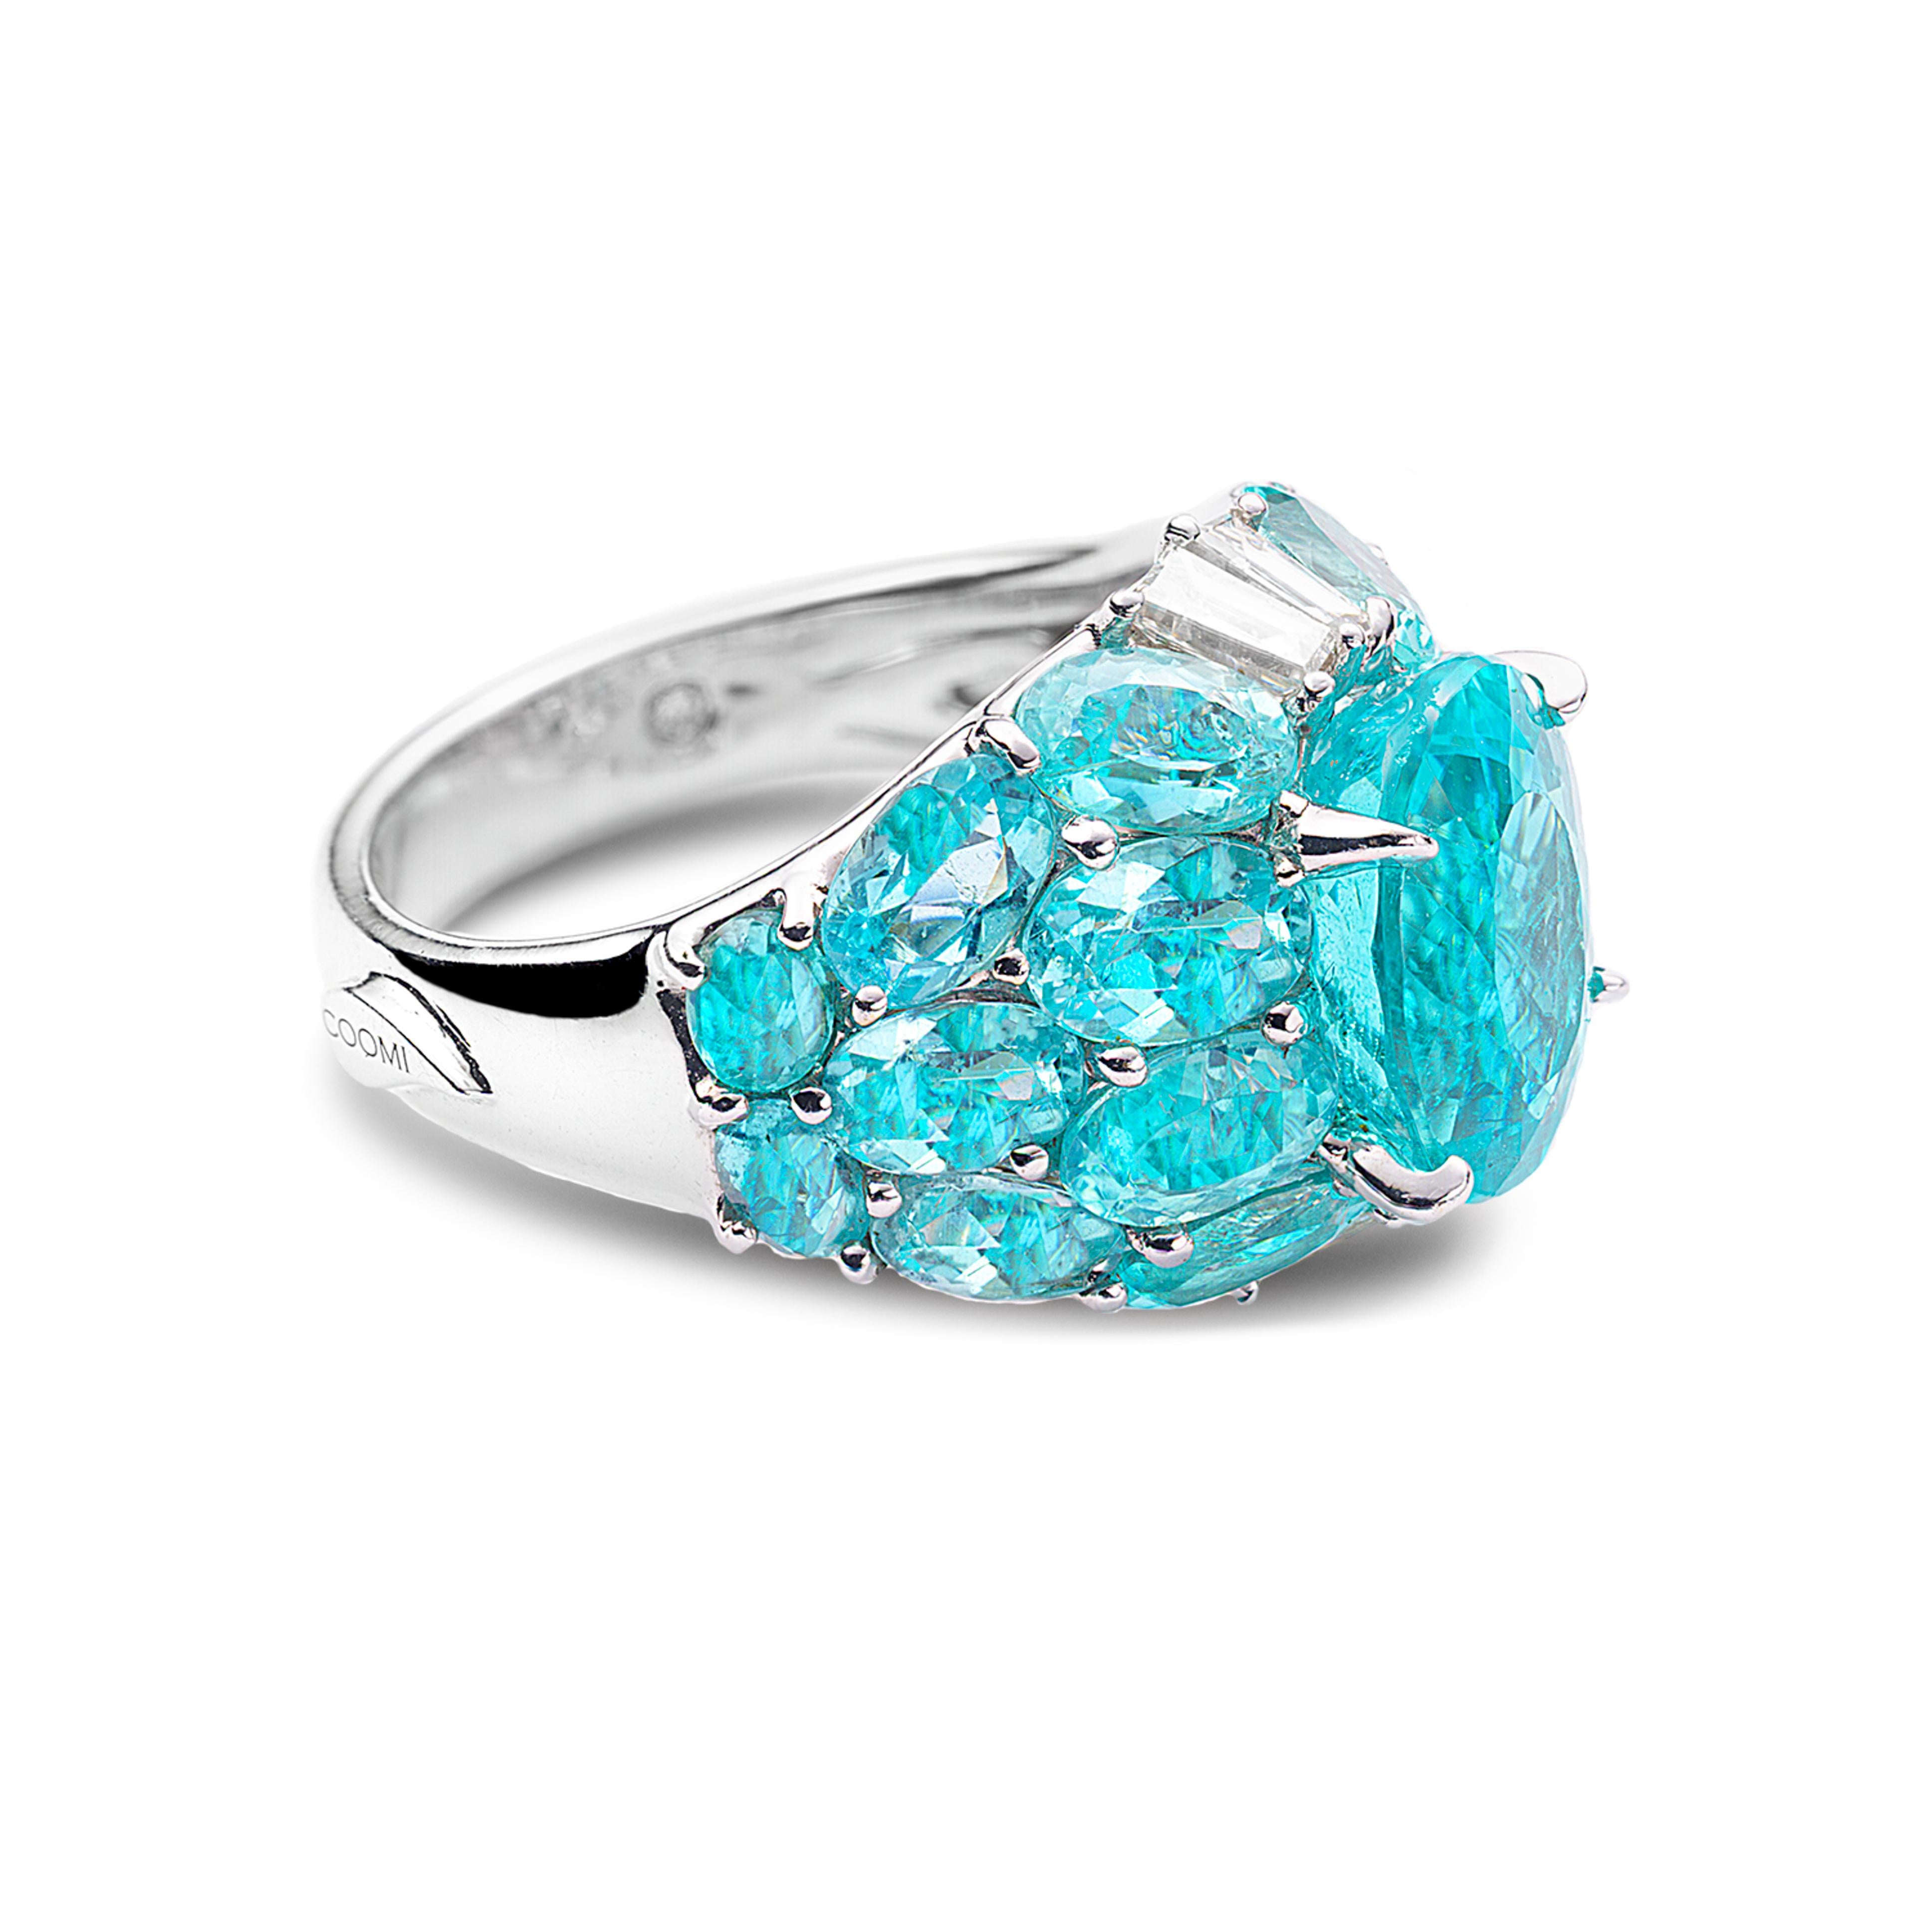 One of a kind Paraiba ring with 6.58cts Paraiba center stone. 5.04cts of Paraiba pave, and 0.79cts of diamonds all set in 18kt white gold. 